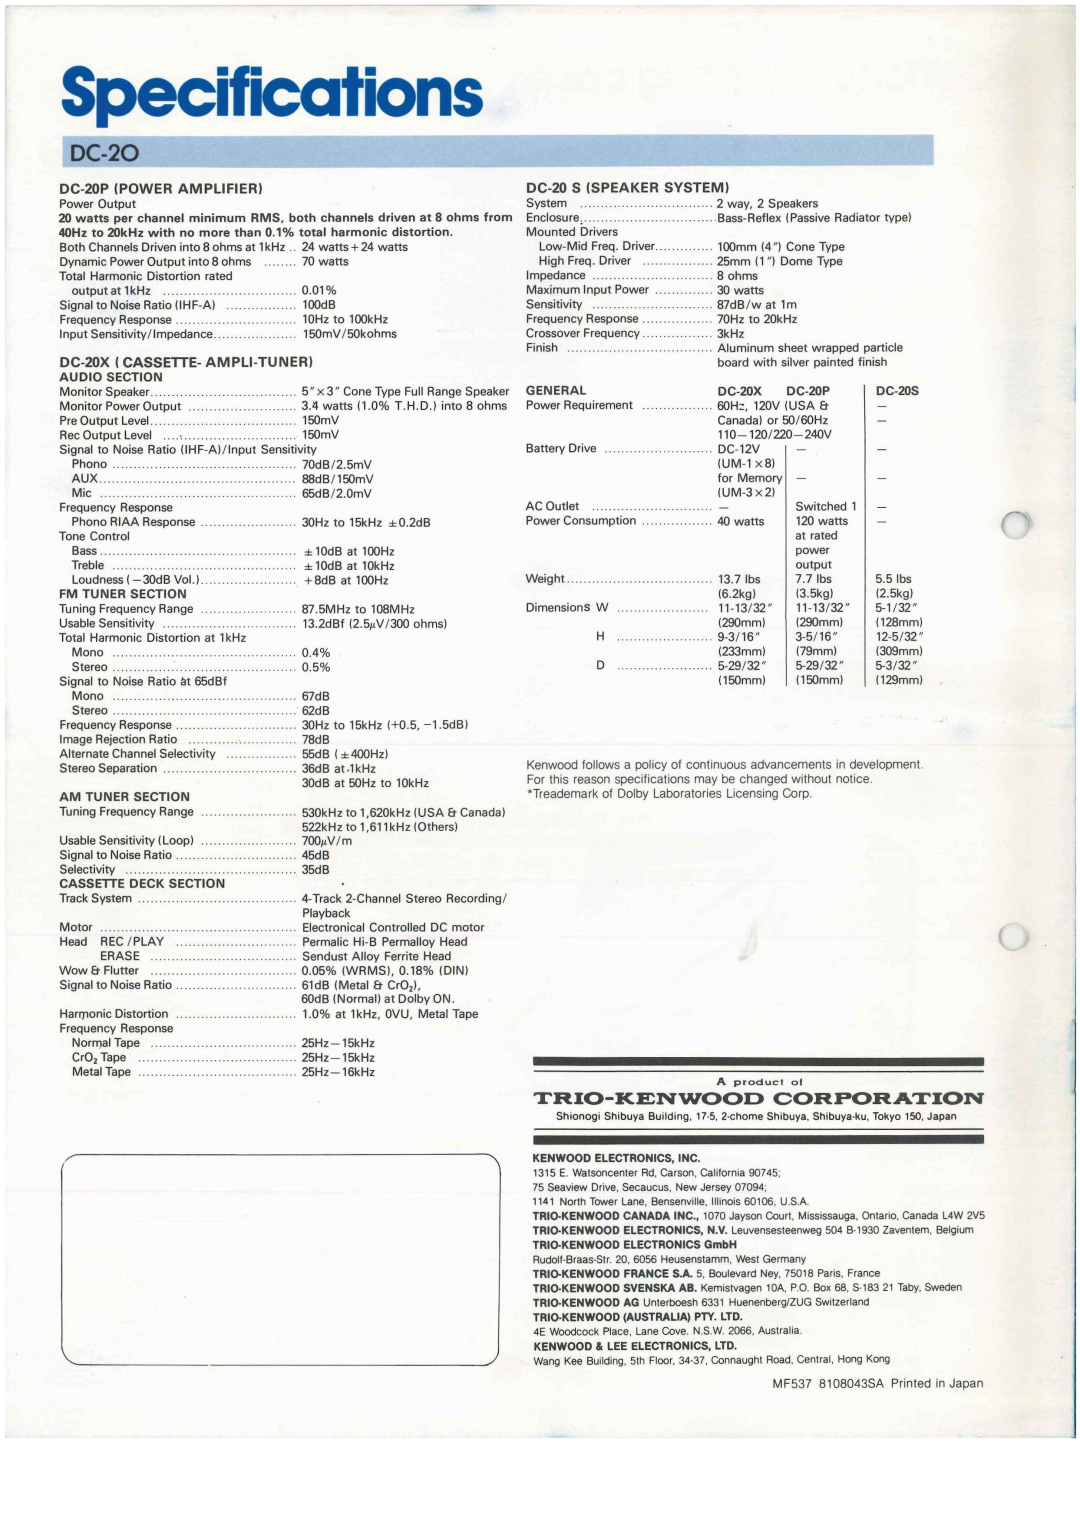 Kenwood DC-20 manual Specifications, T R I O - K E N W O O D C O R P O R A T I O N 